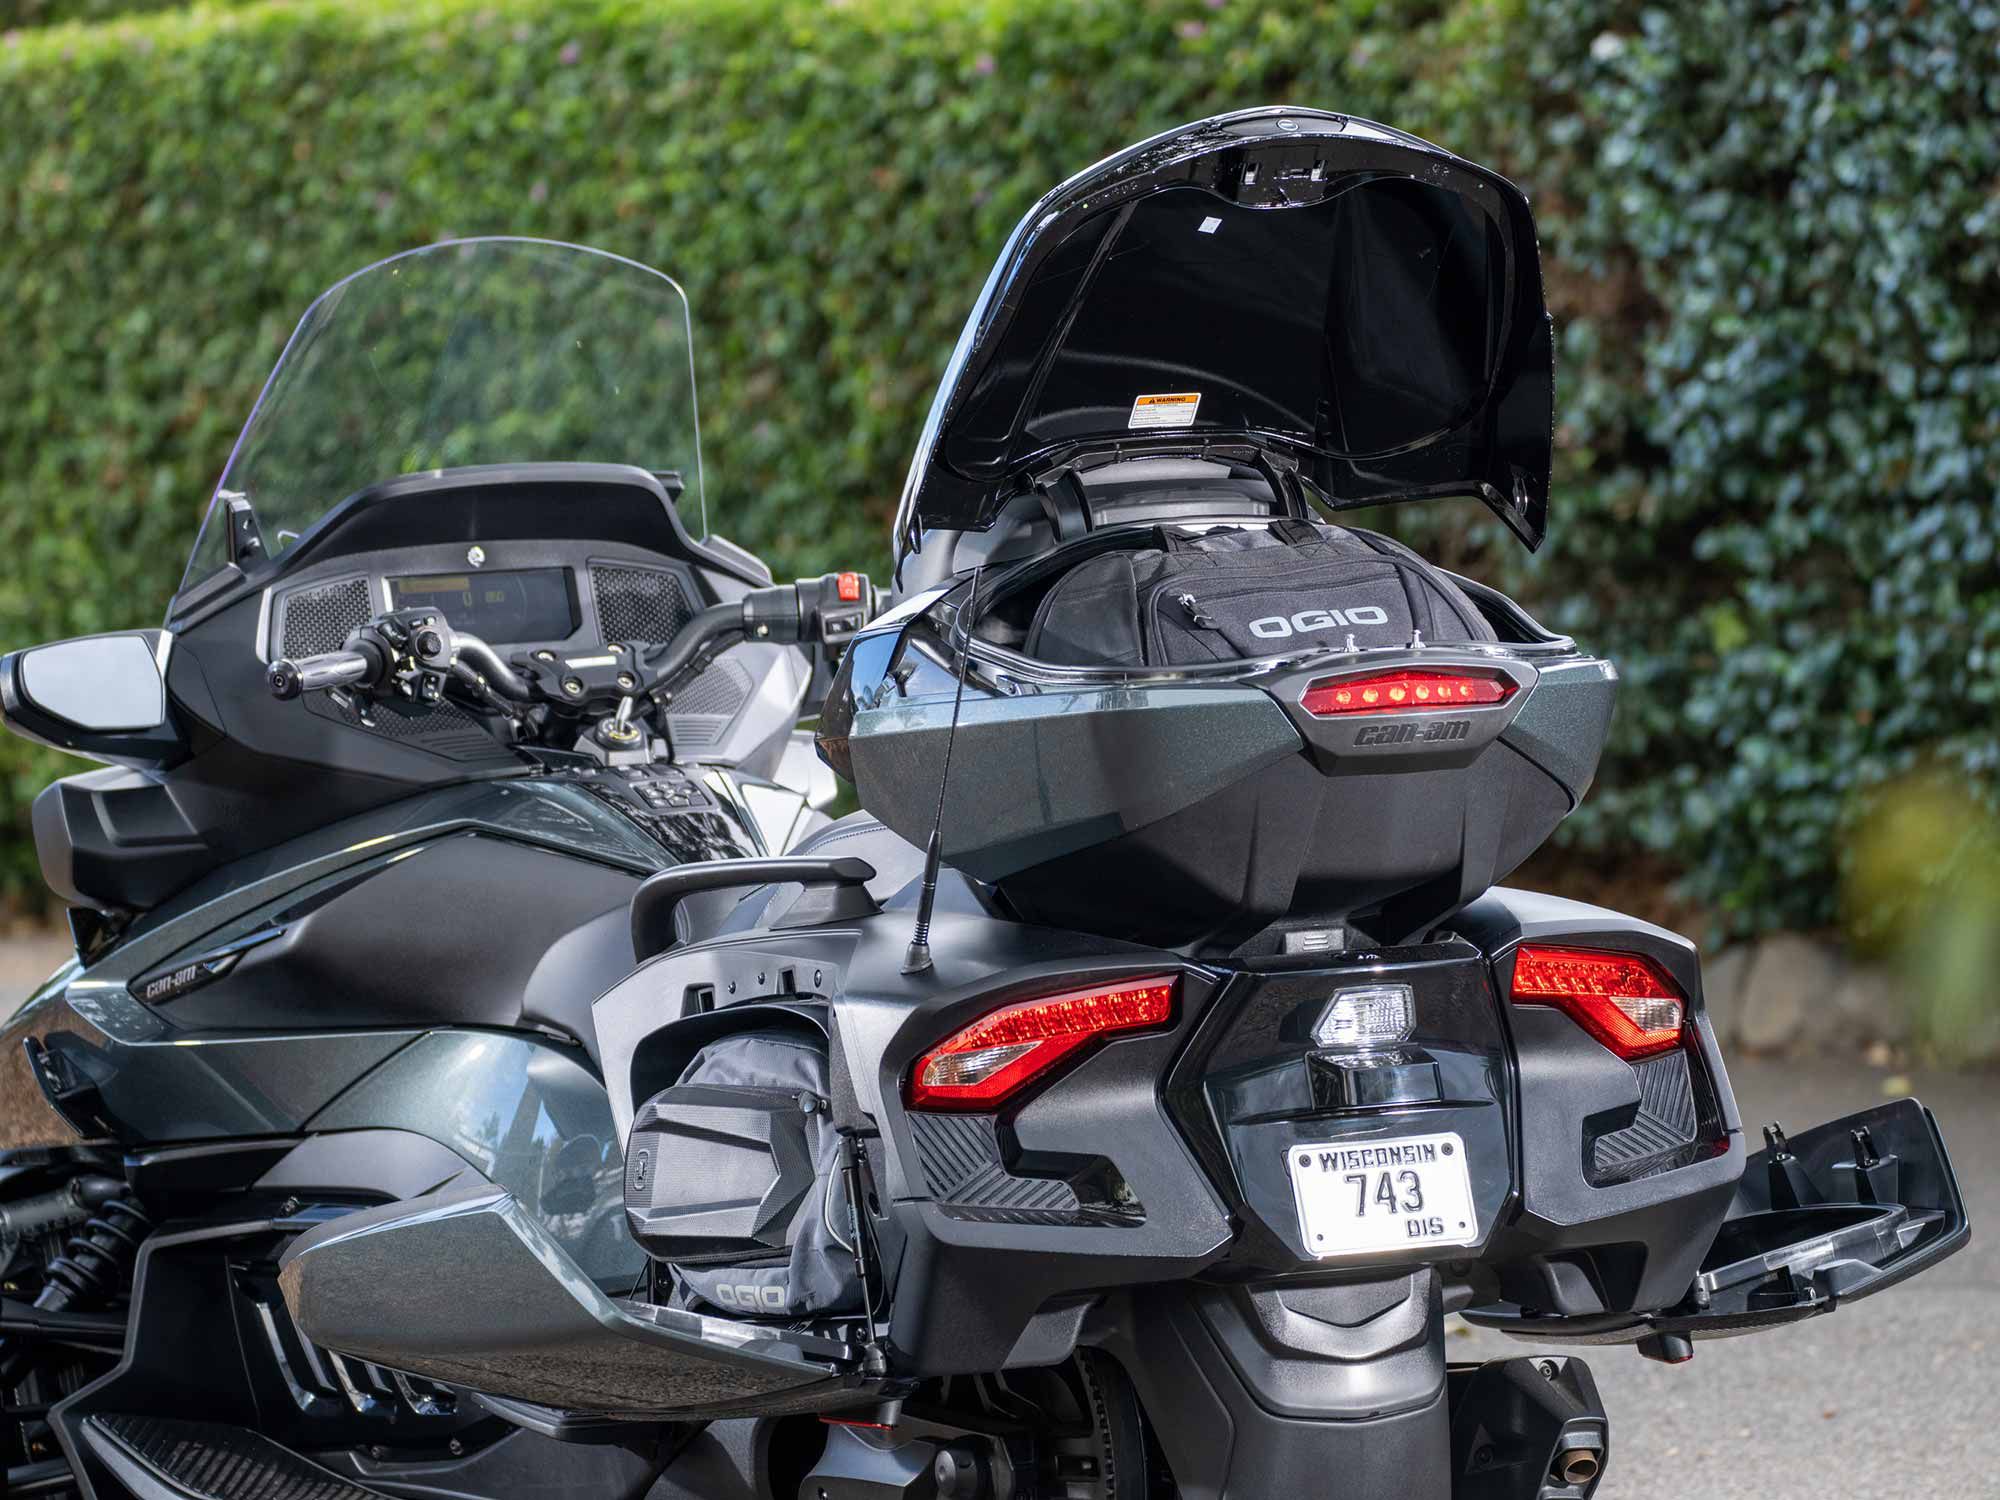 When it comes to storage, the Can-Am Spyder RT Limited reigns supreme. It offers three times more storage capacity than Honda’s Gold Wing Tour.